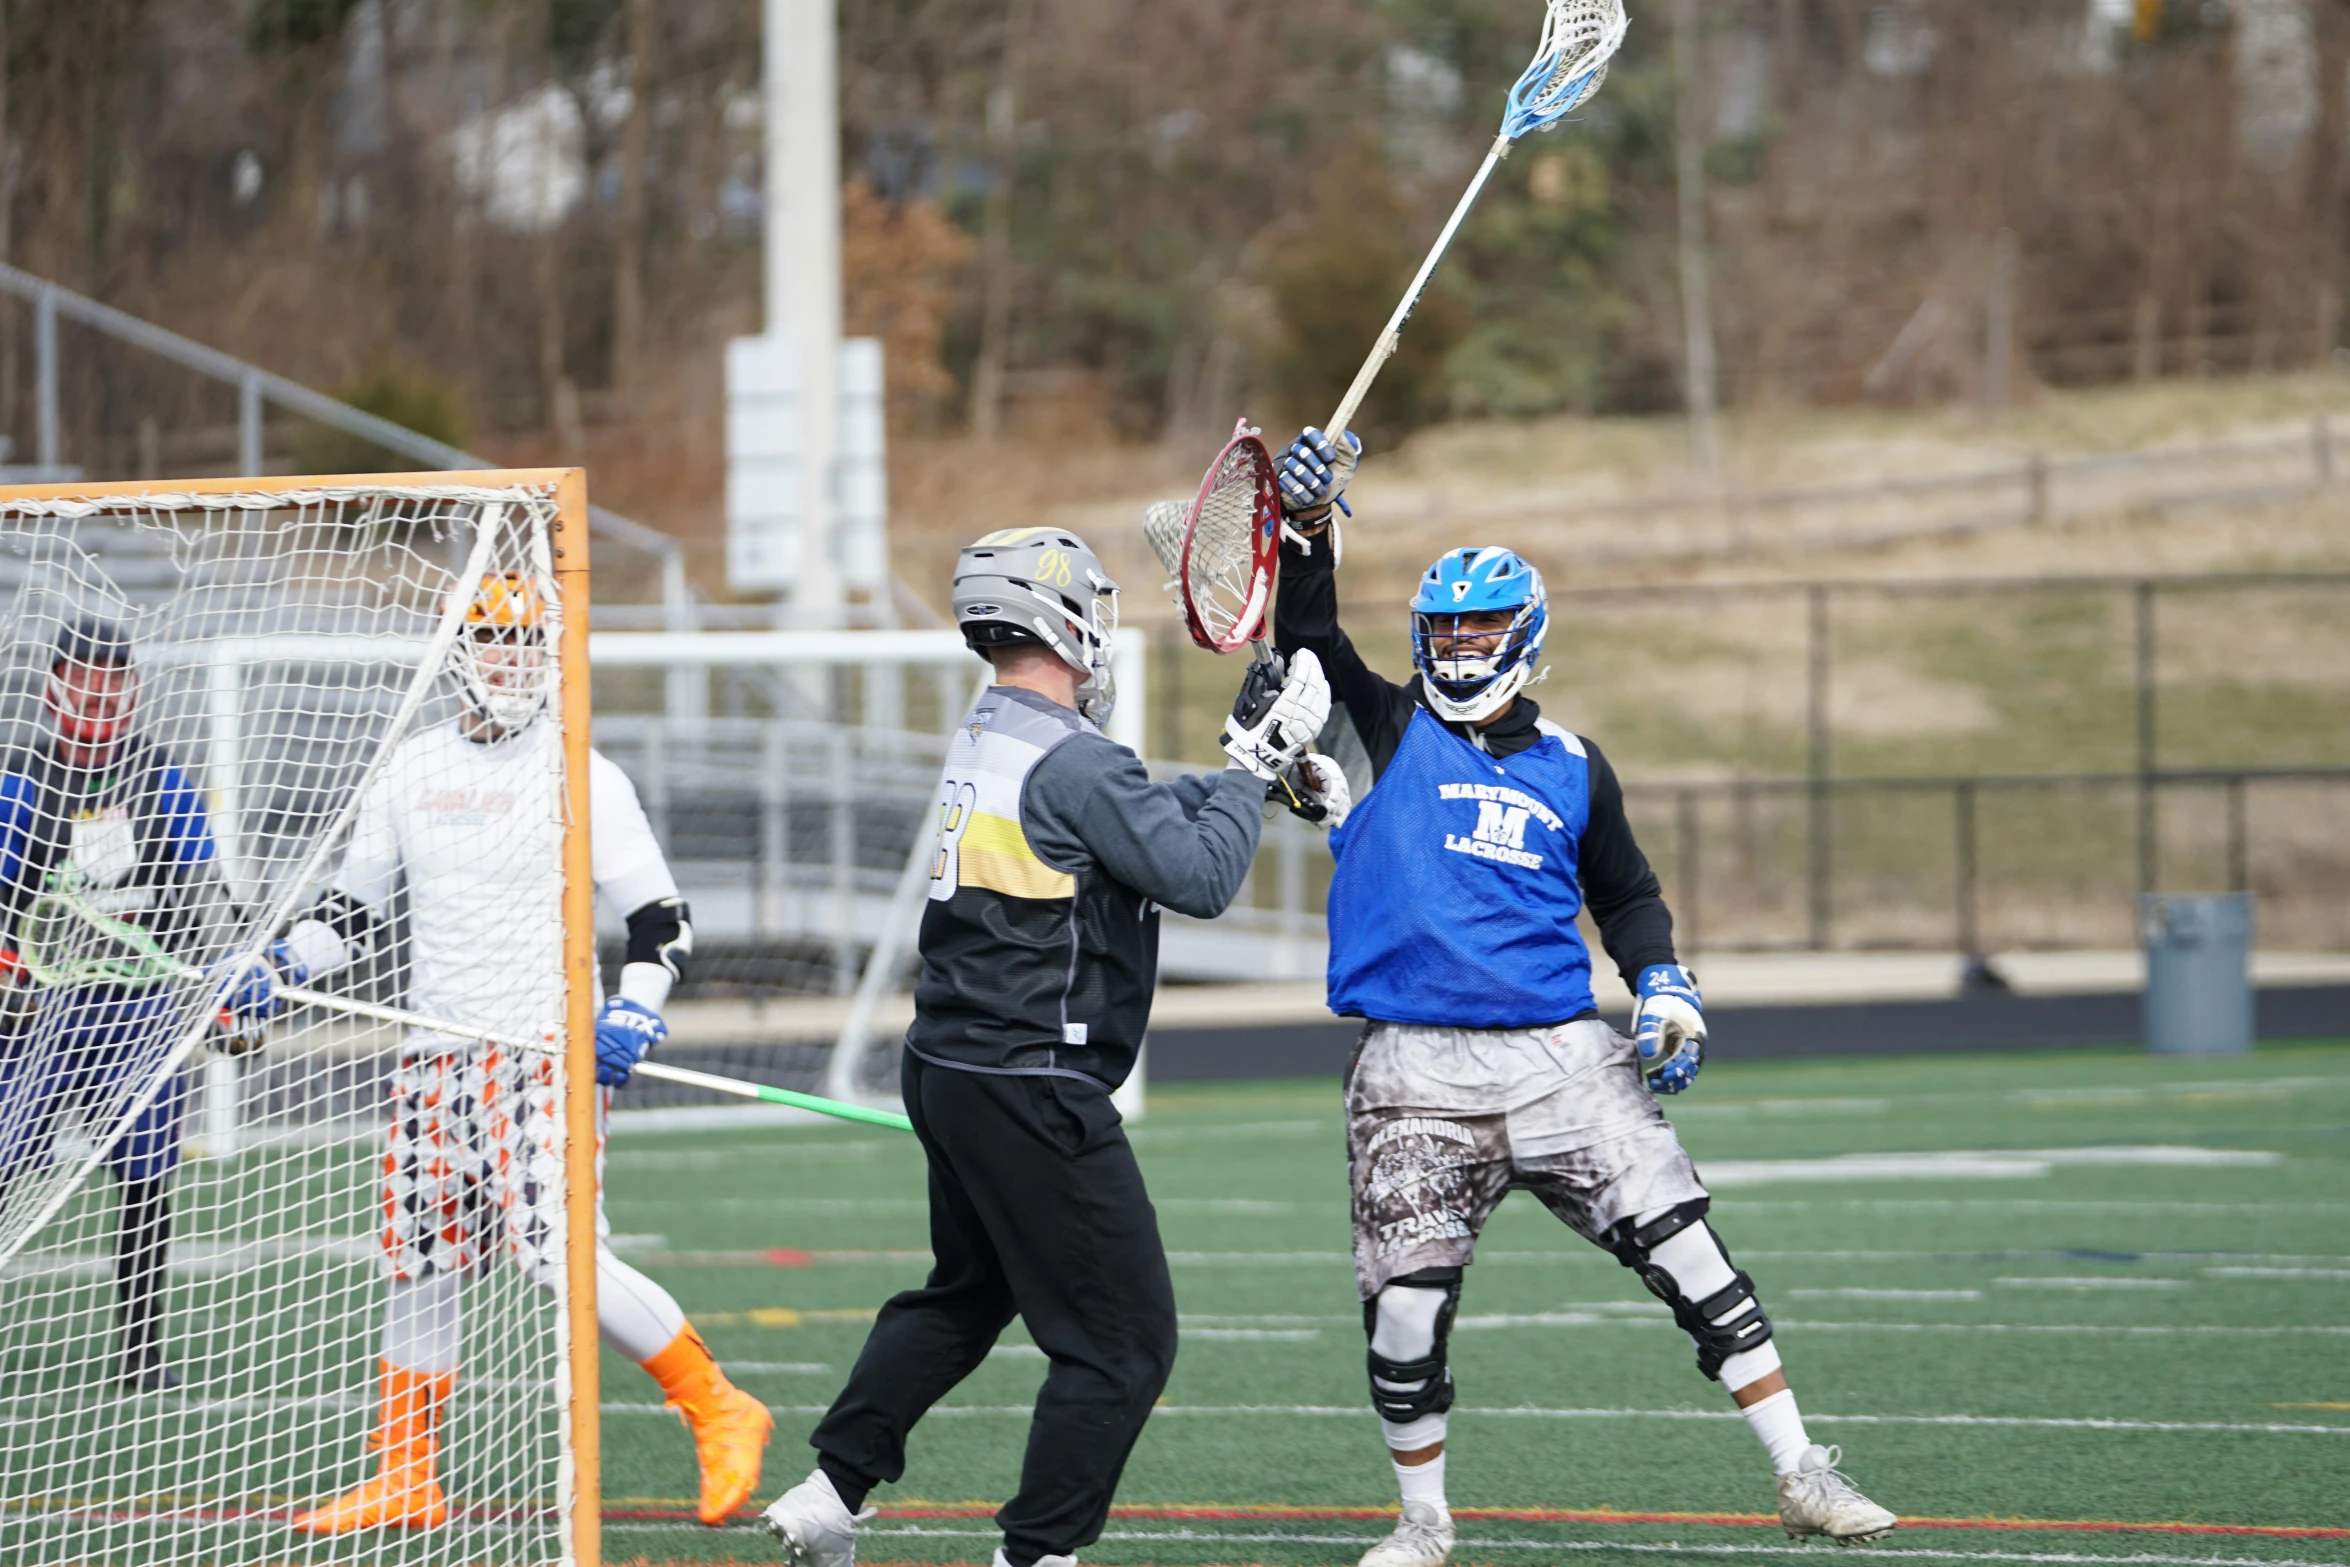 a man holding onto a lacrosse ball during a game